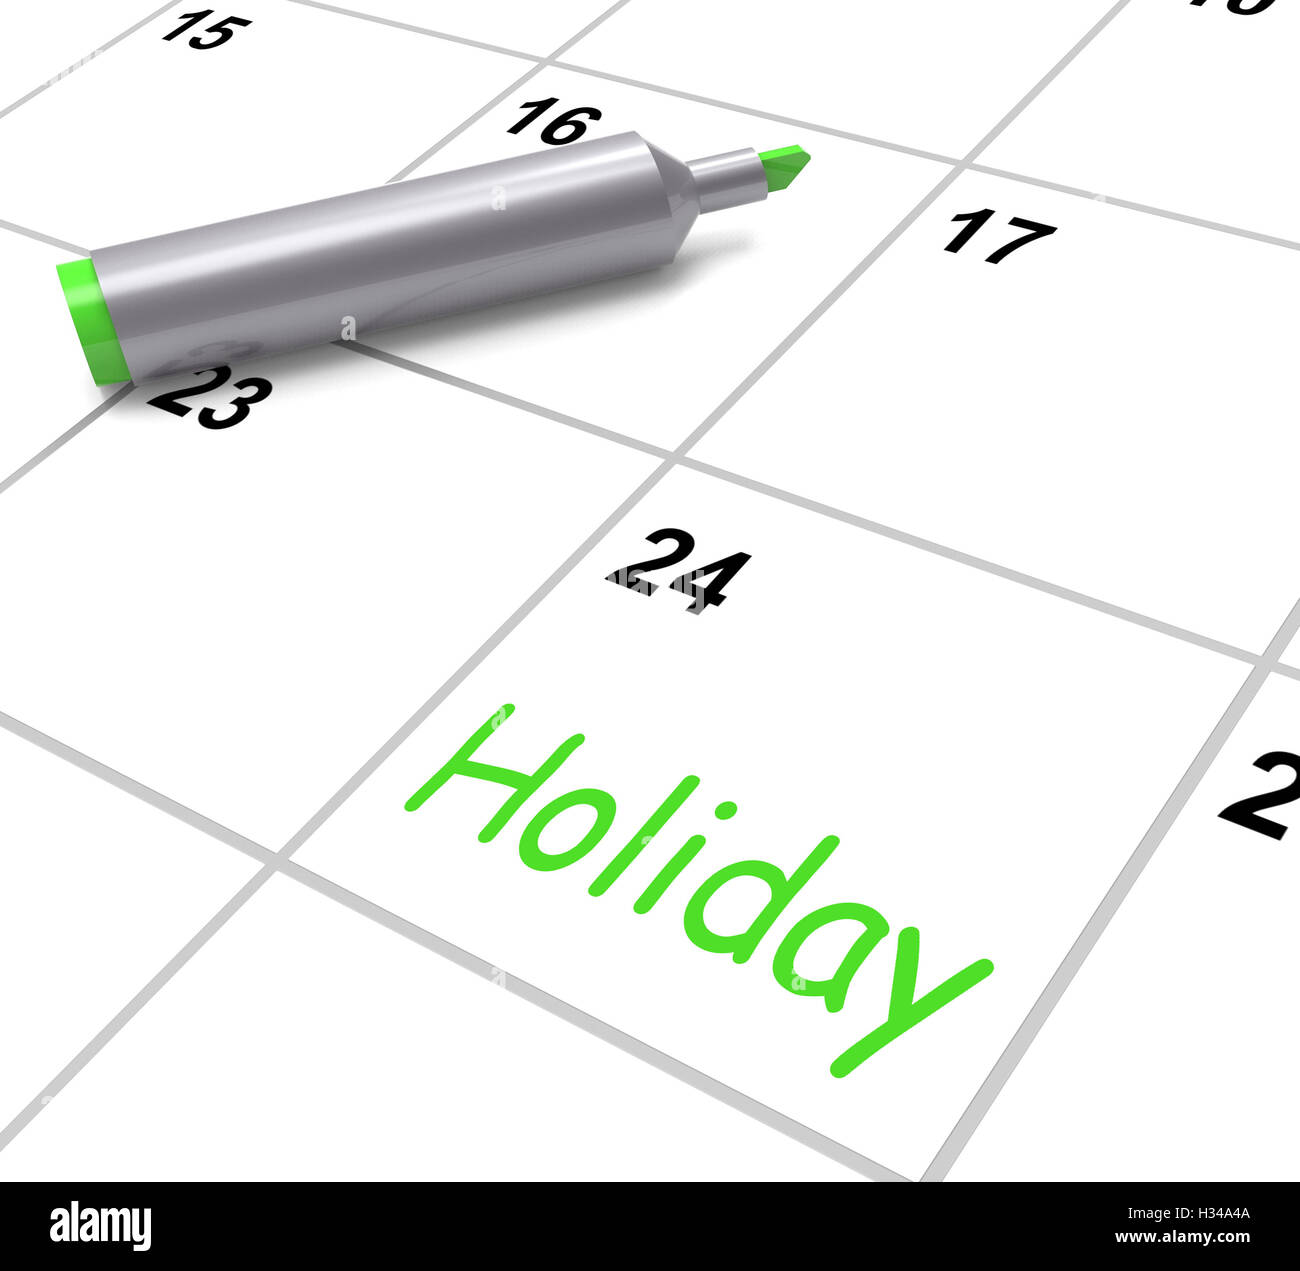 Holiday Calendar Shows Rest Day And Break From Work Stock Photo